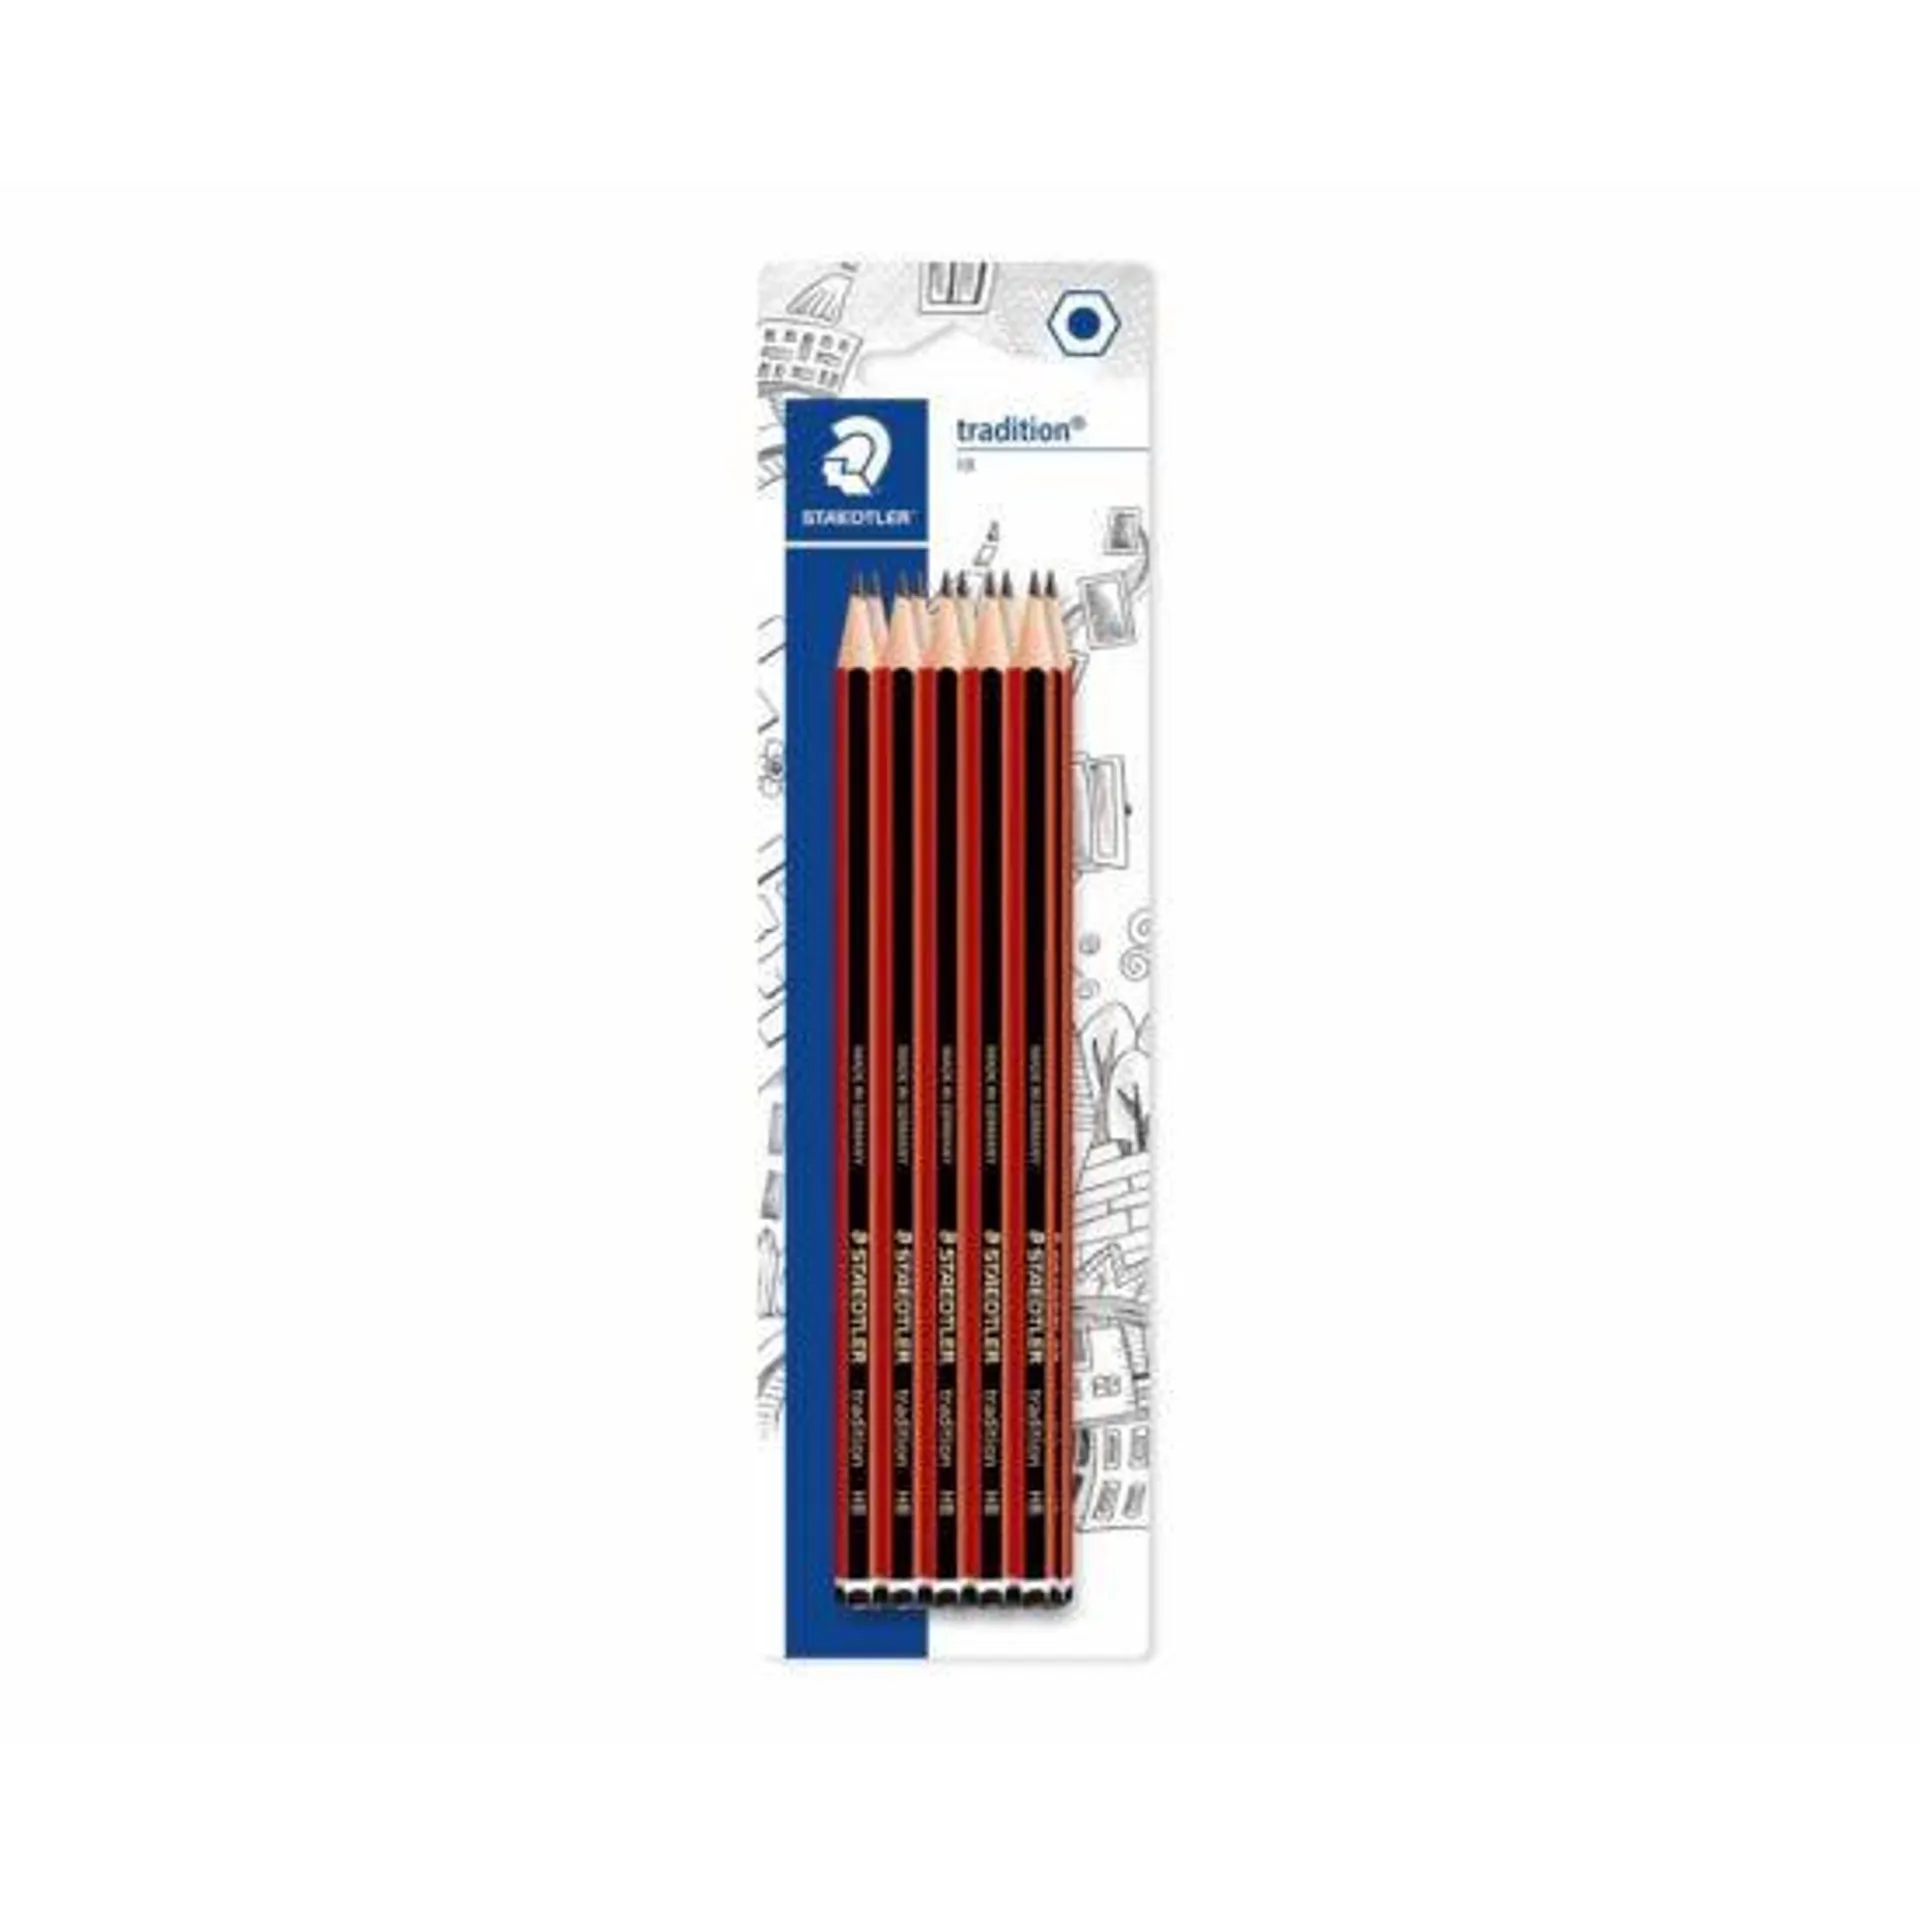 Staedtler Traditional Pencil HB Pack of 10